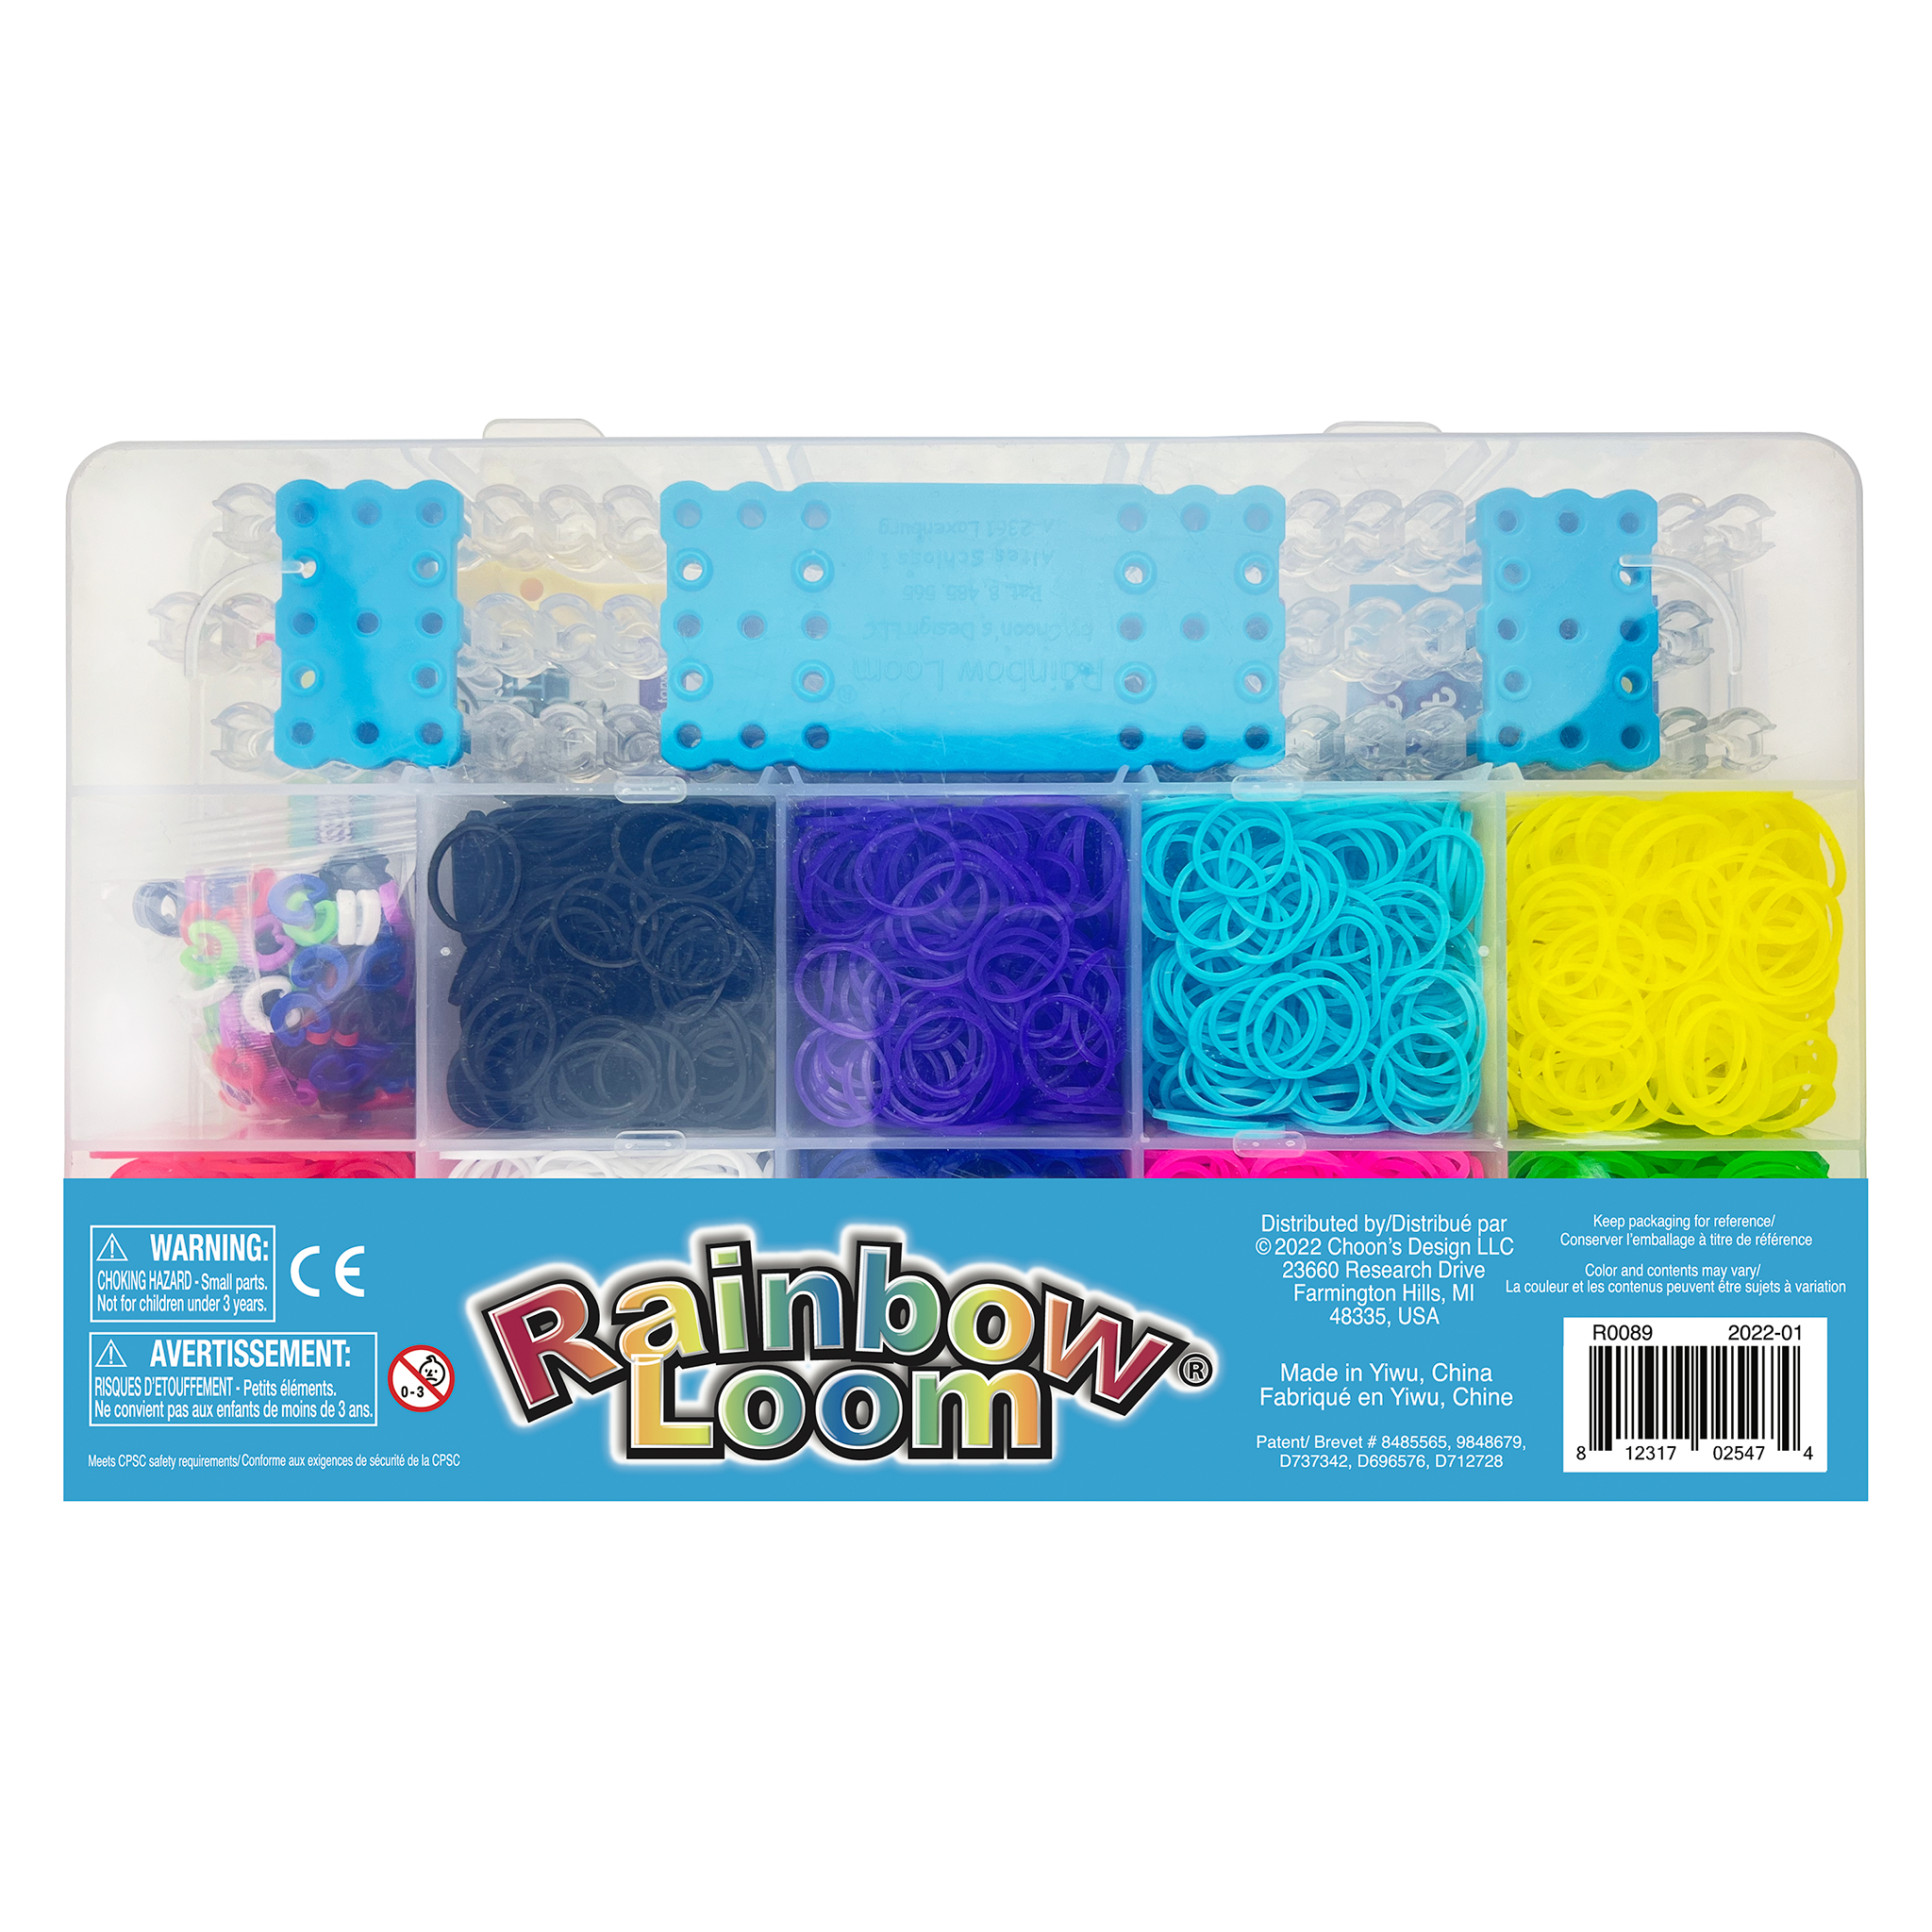 Rainbow Looms Are Good For Kids